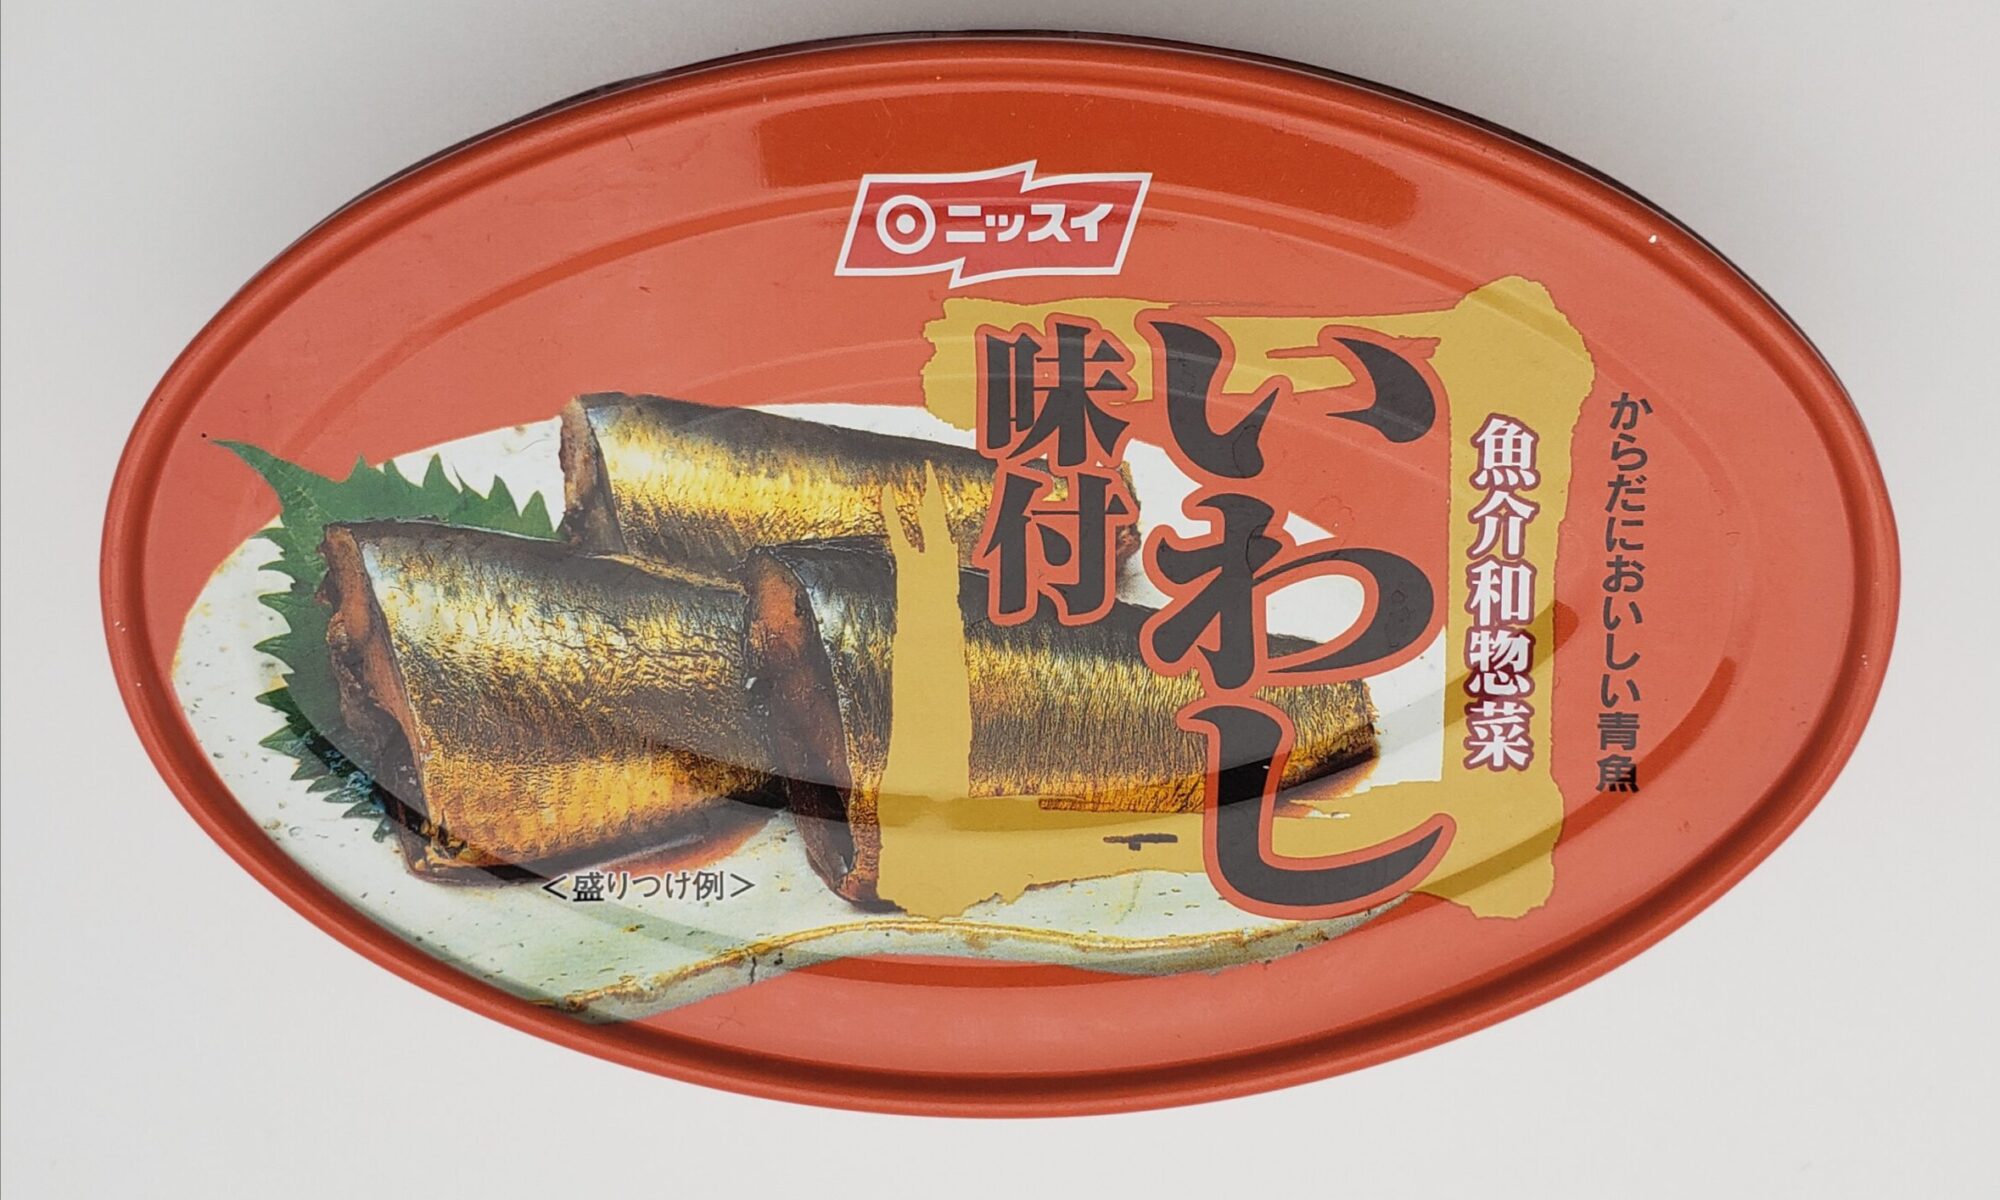 Image of Nissui Sardines in Sweet Soy